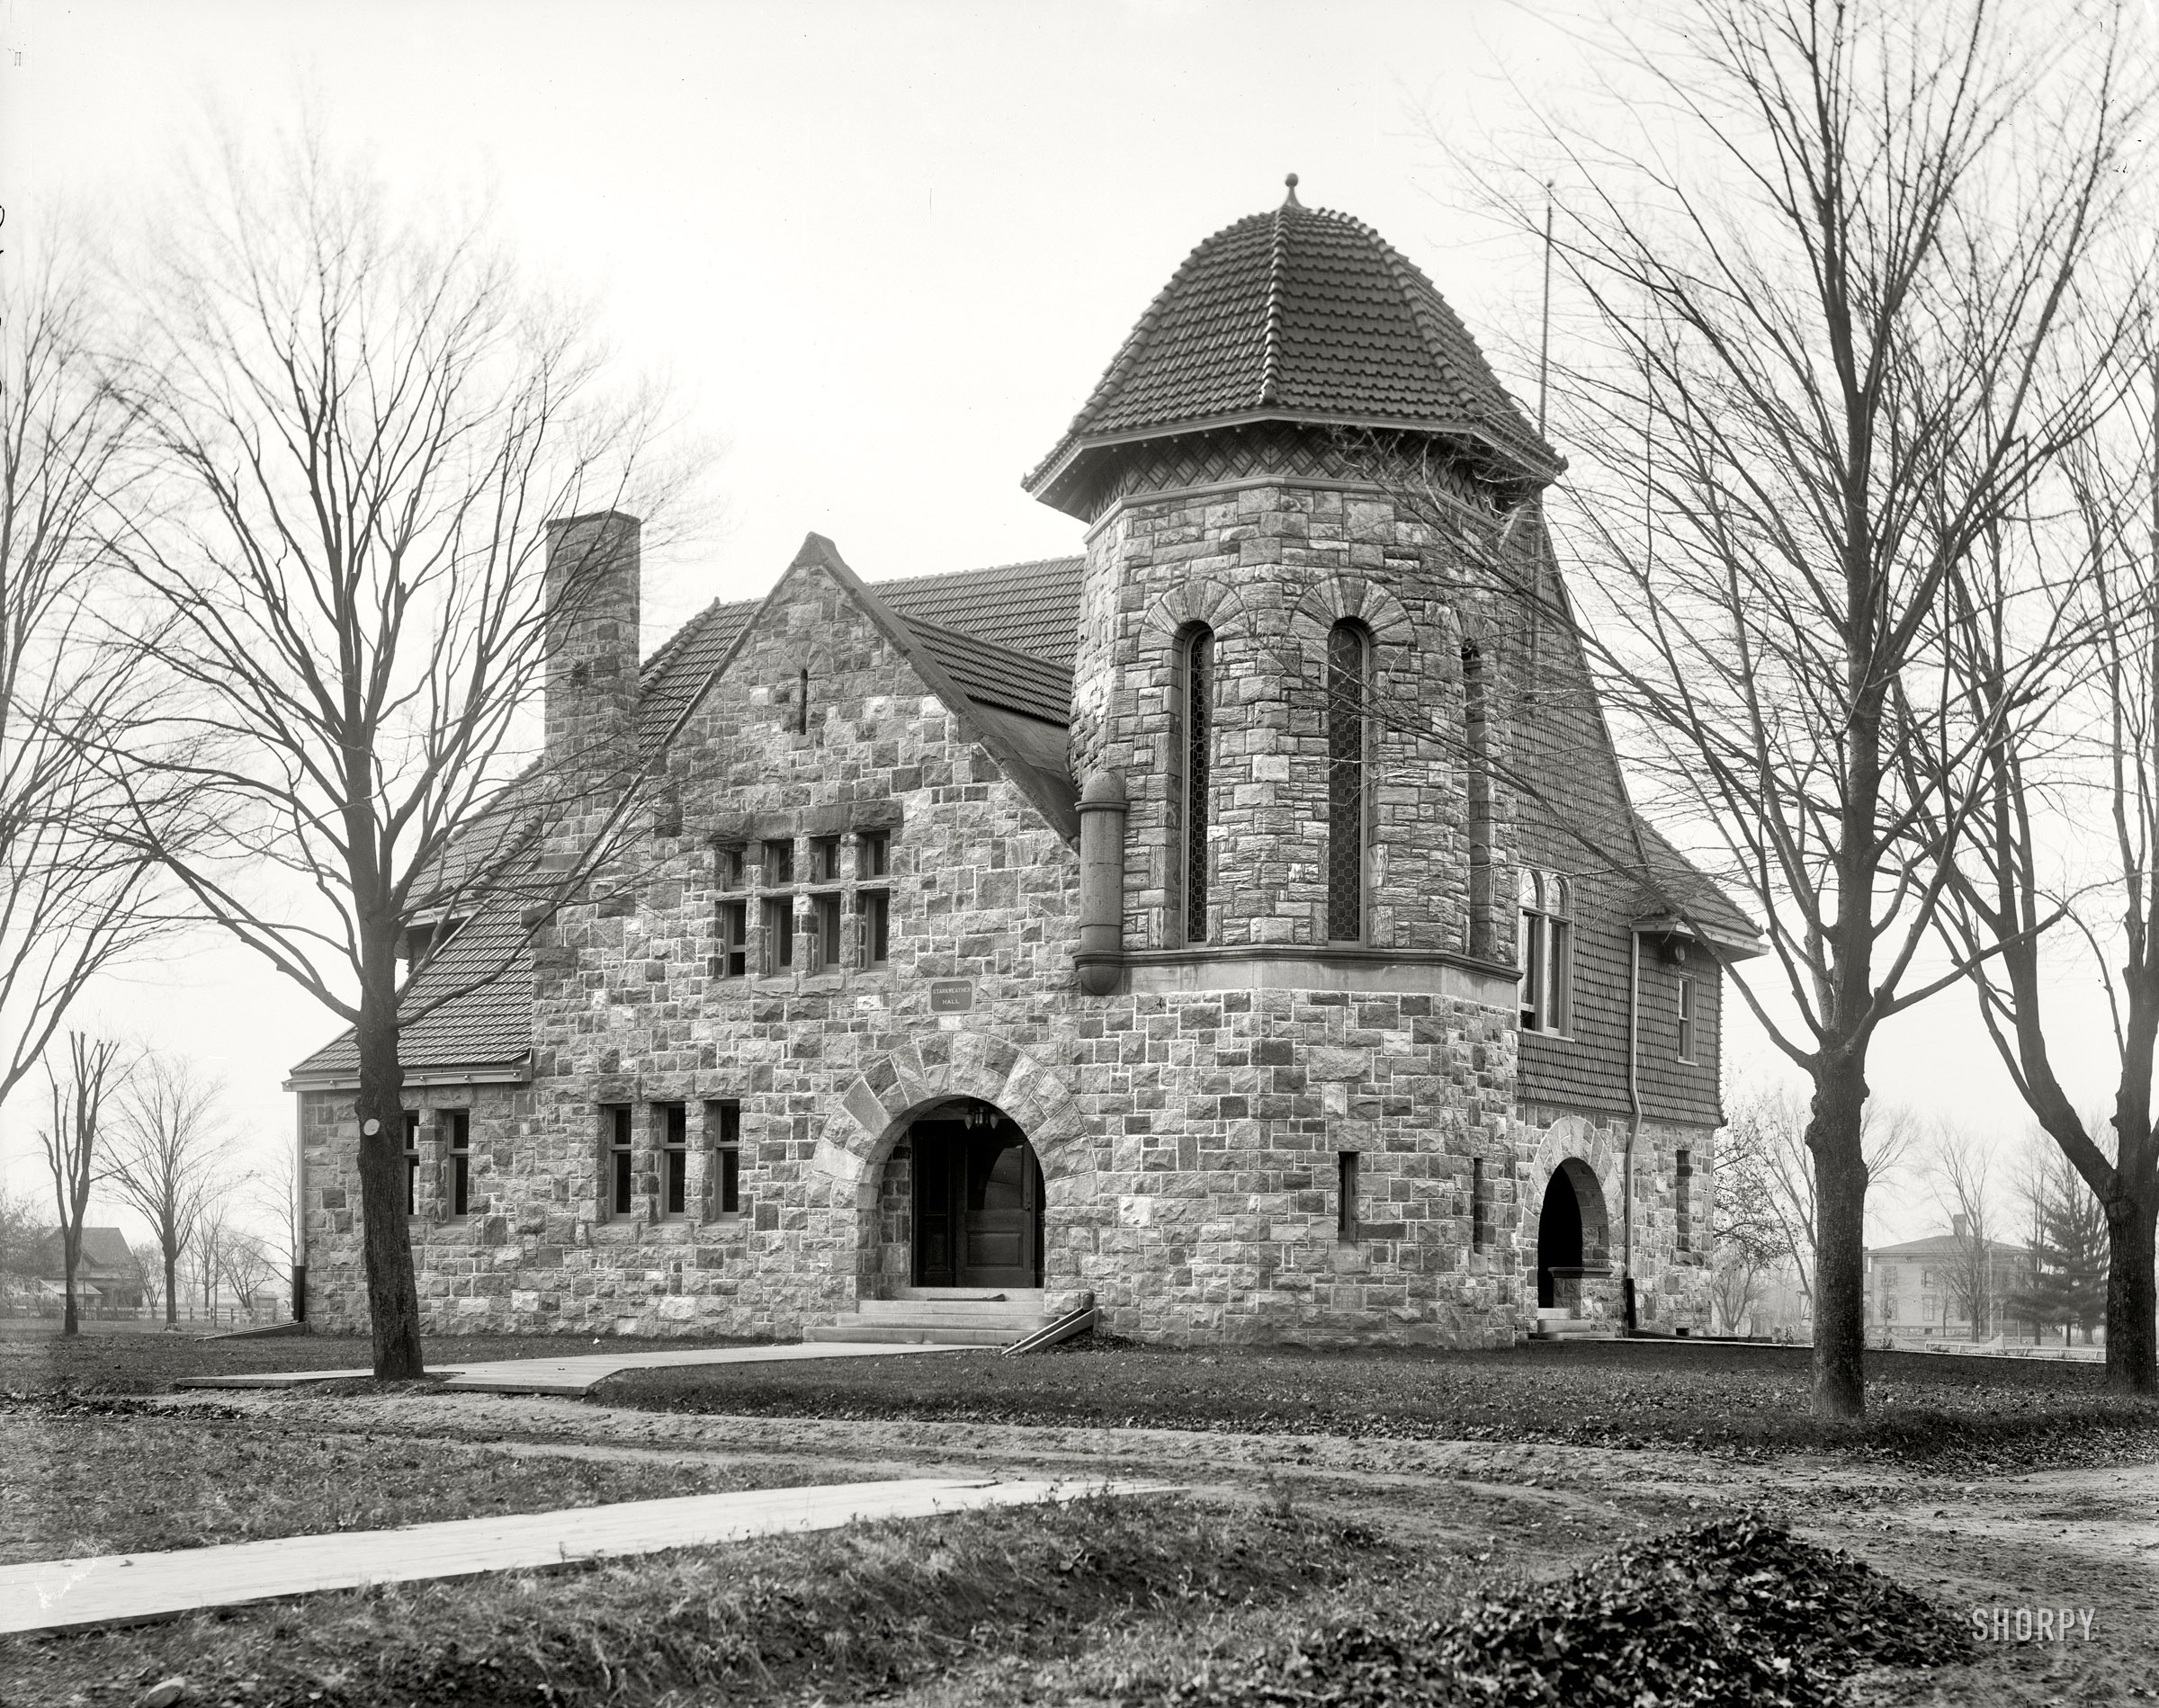 Ypsilanti, Michigan, circa 1902. "Starkweather Hall, Students' Christian Association, Michigan State Normal College." Not far from the Ypsi Water Tower. 8x10 inch glass negative, Detroit Publishing Company. View full size.